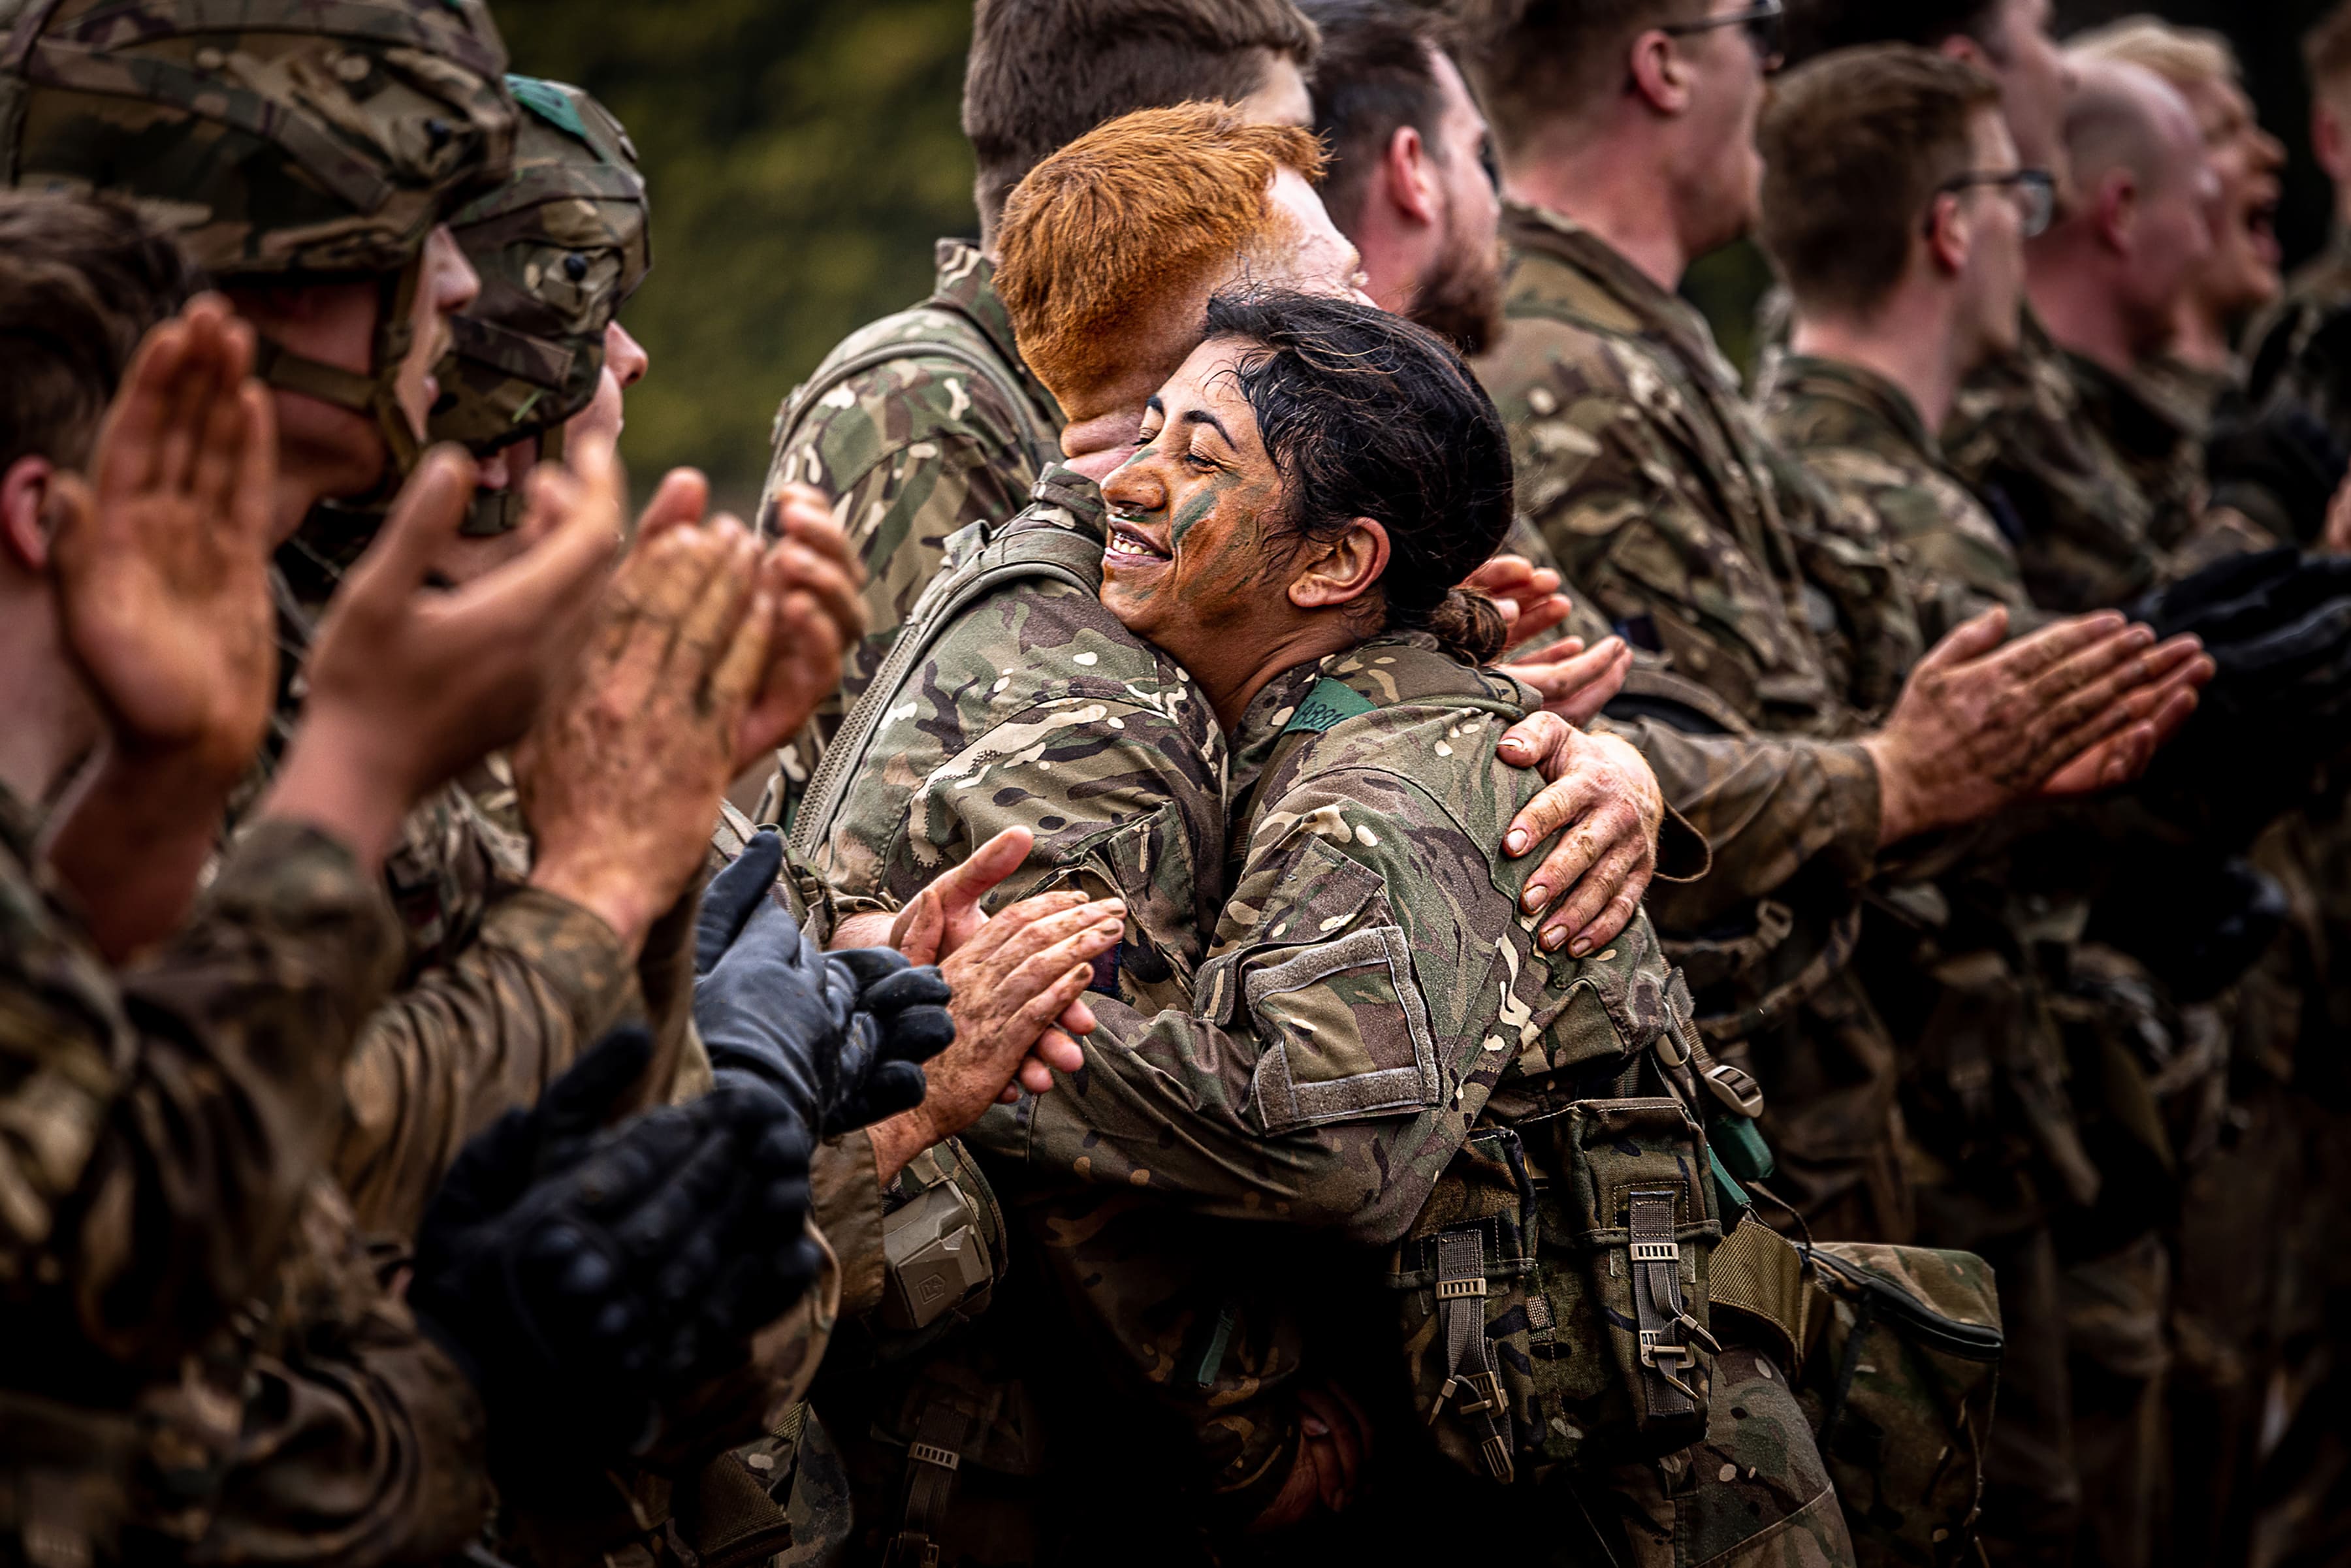 RAF Personnel celebrating after the completion of field exercises